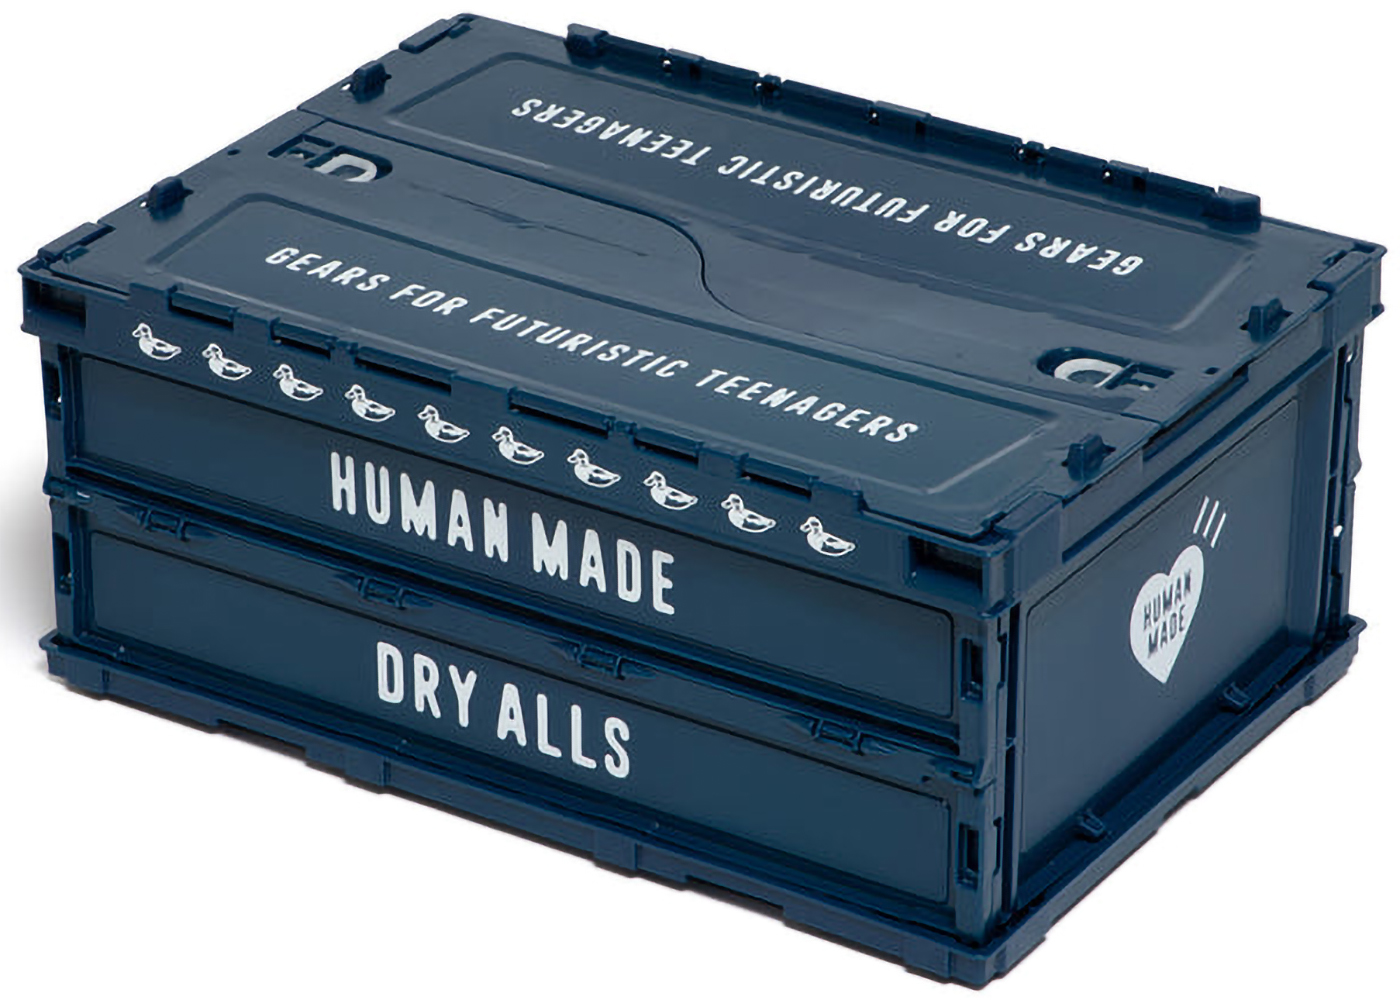 Human Made 30L Container Navy